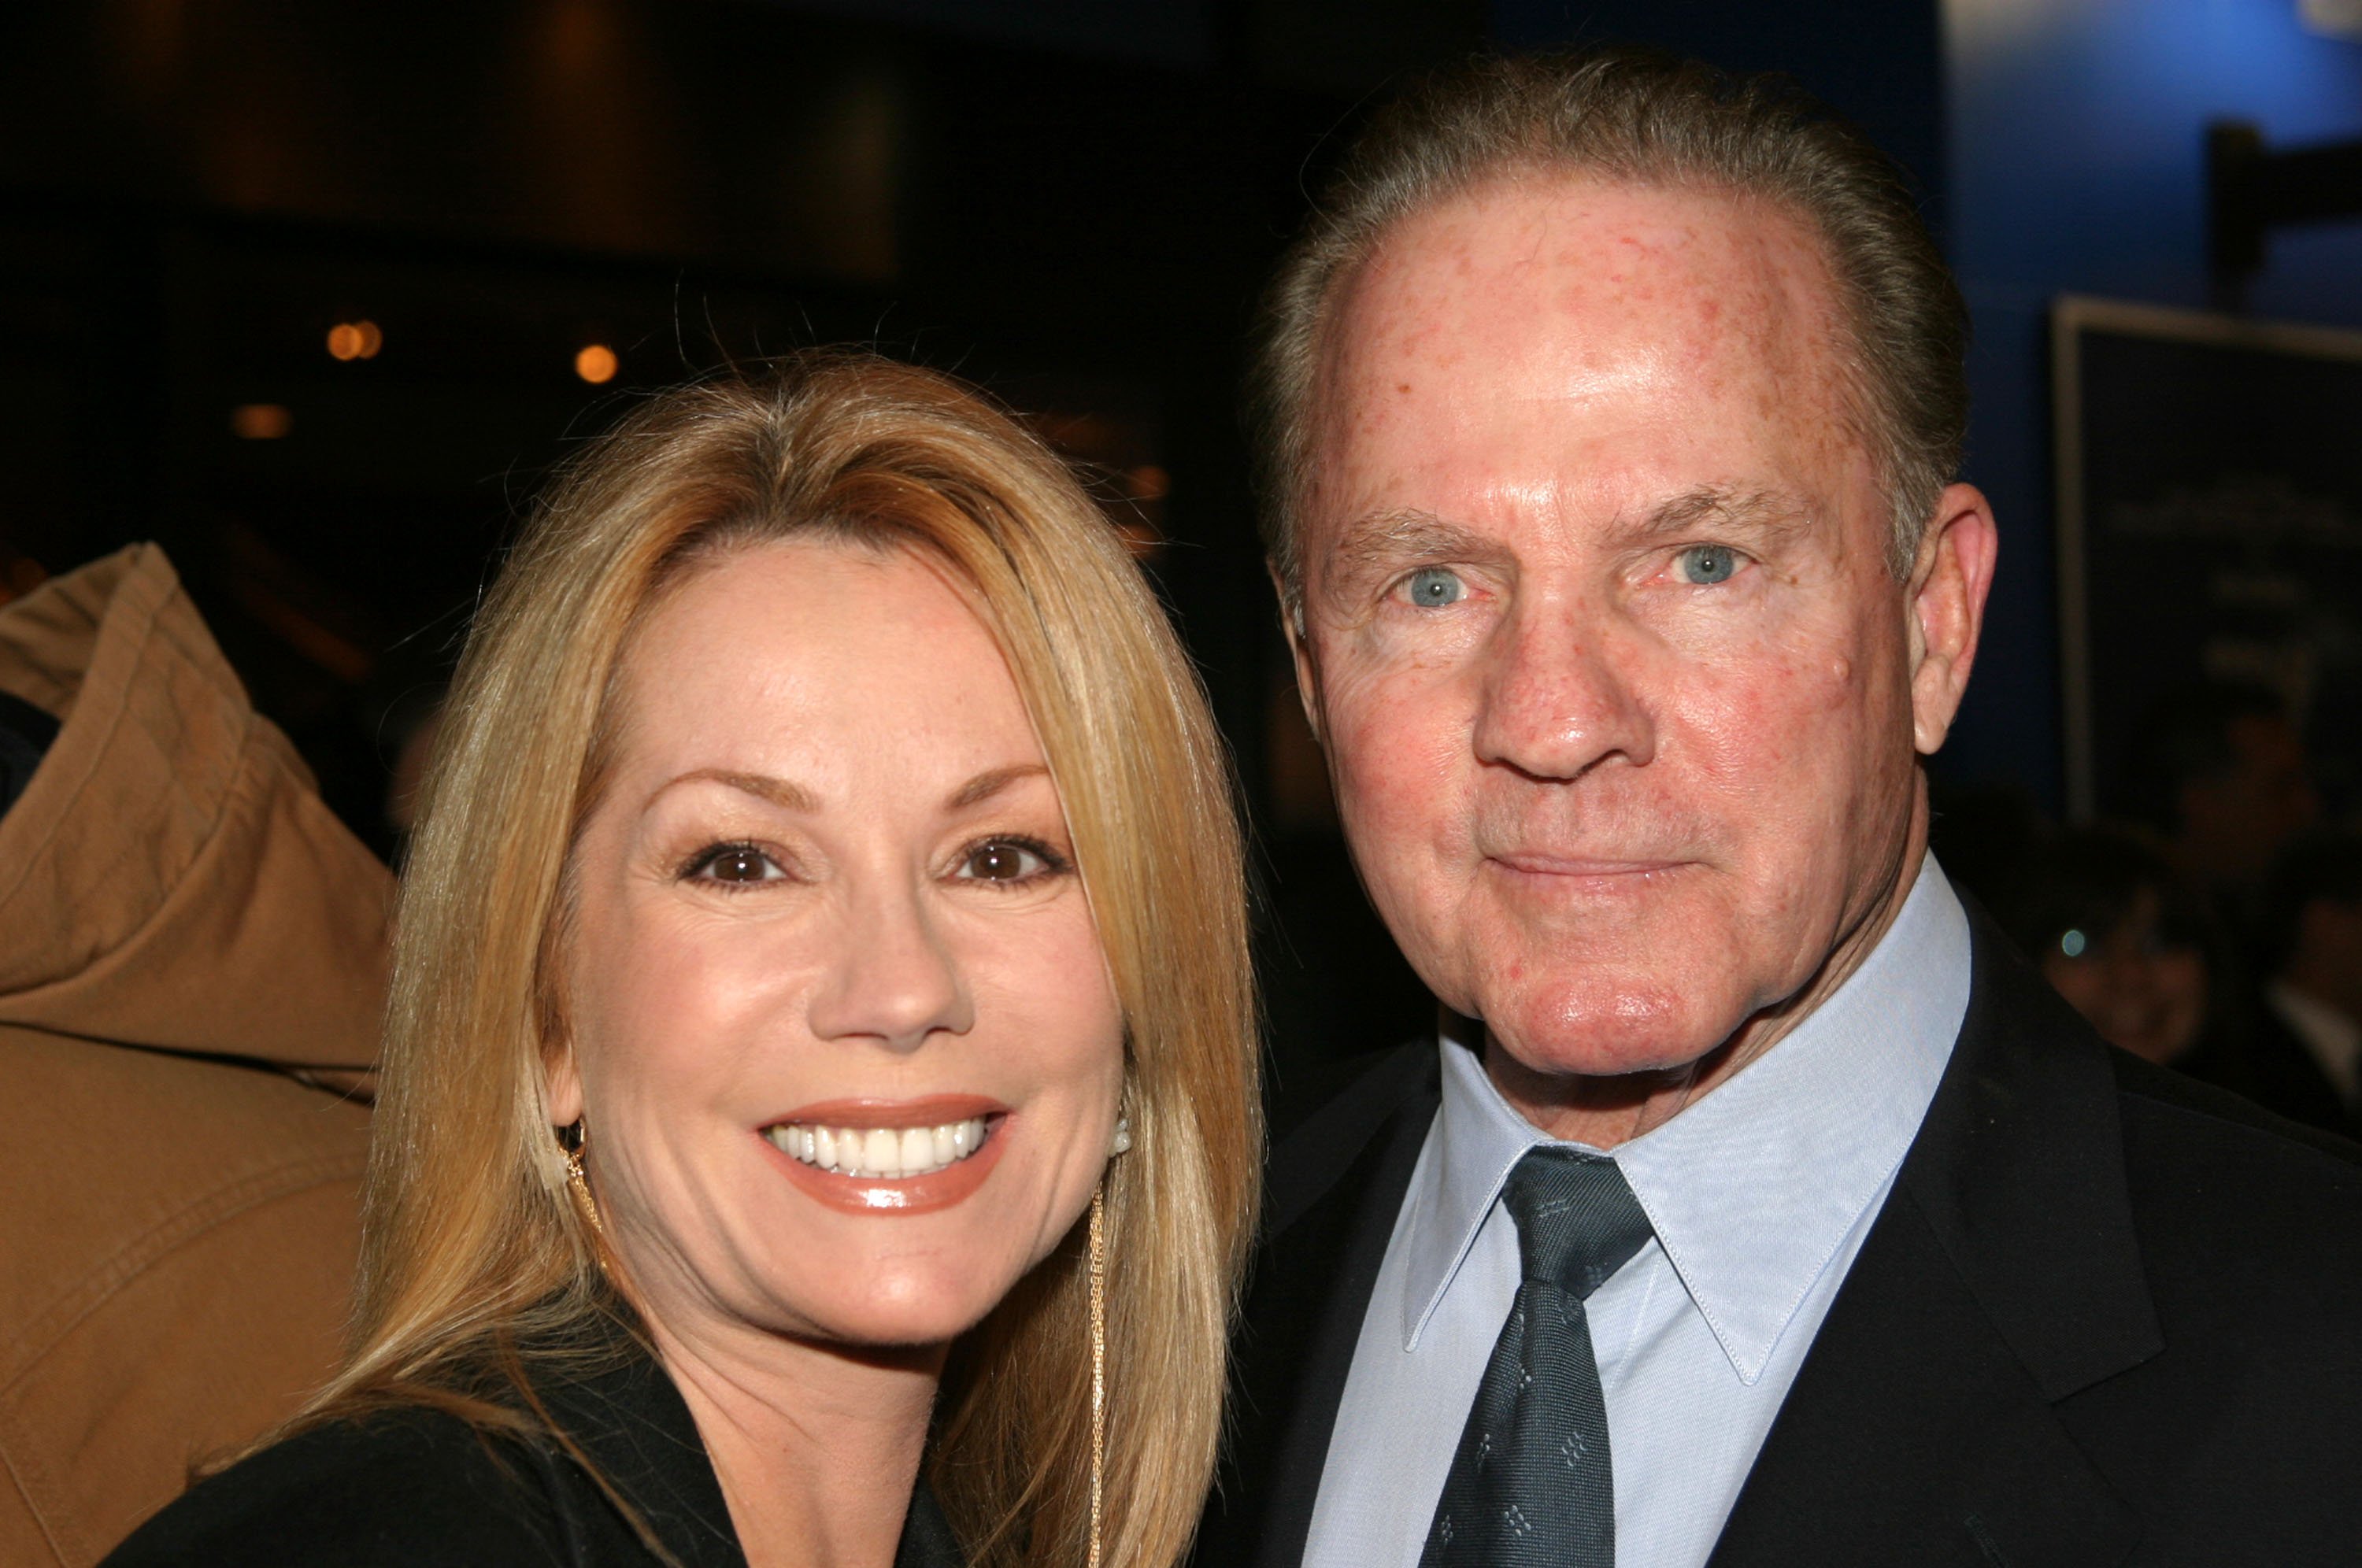 Kathie Lee Gifford and Frank Gifford during Opening Night of Fiddler on the Roof Broadway Revival at The Minskoff Theatre in New York, New York, United States. | Source: Getty Images